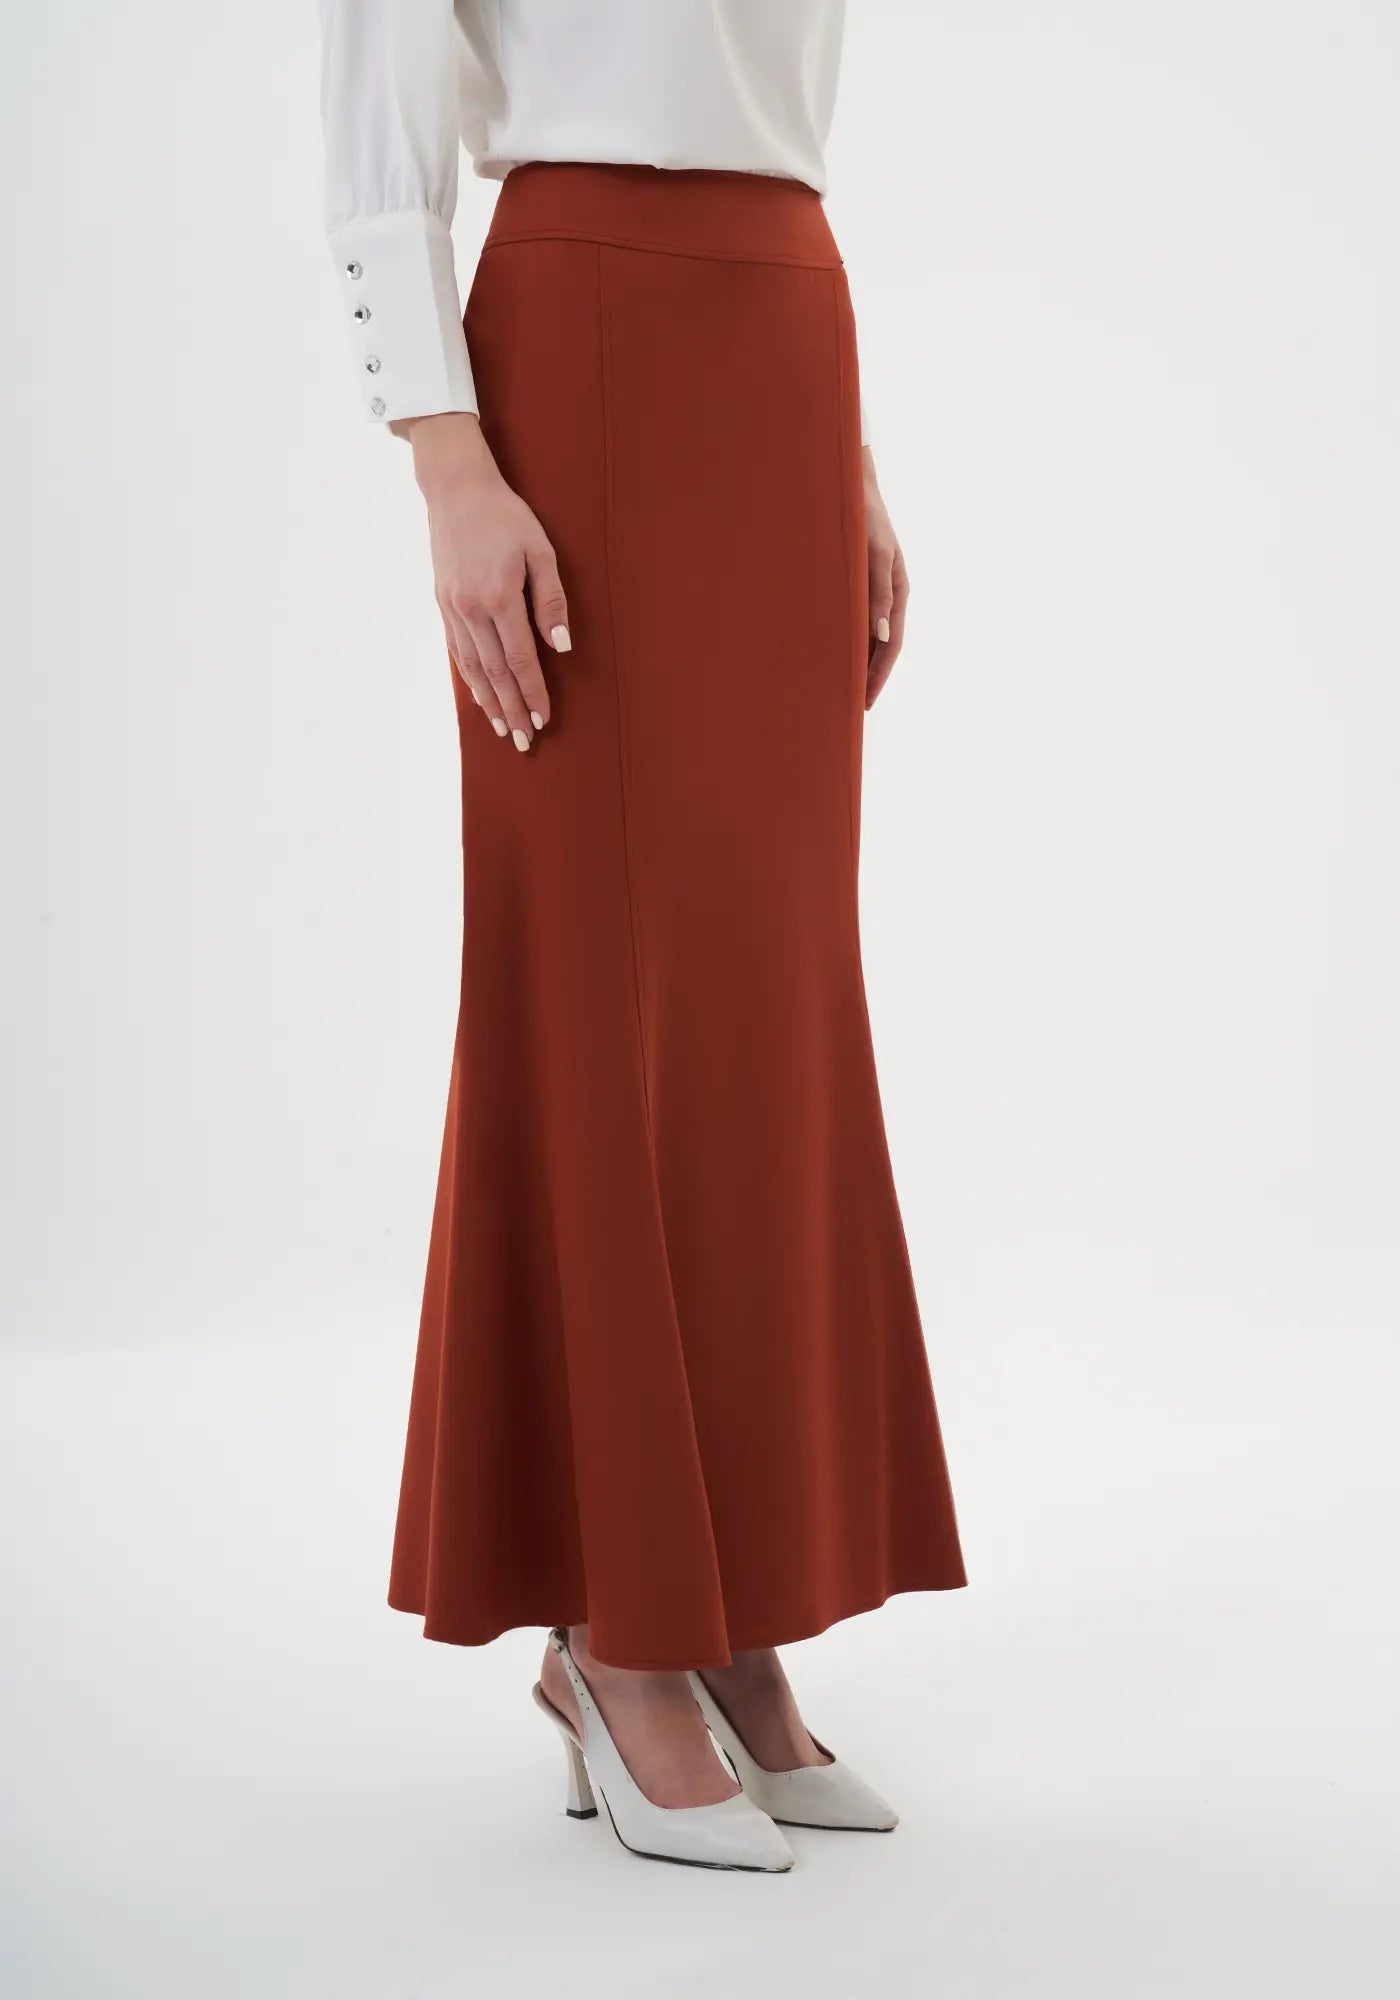 Copy of Fishtail Maxi Skirt (Available in Plus Size 4-20) | Solid Bodycon Mermaid Skirt, Elegant High Waist Maxi Skirt G-Line